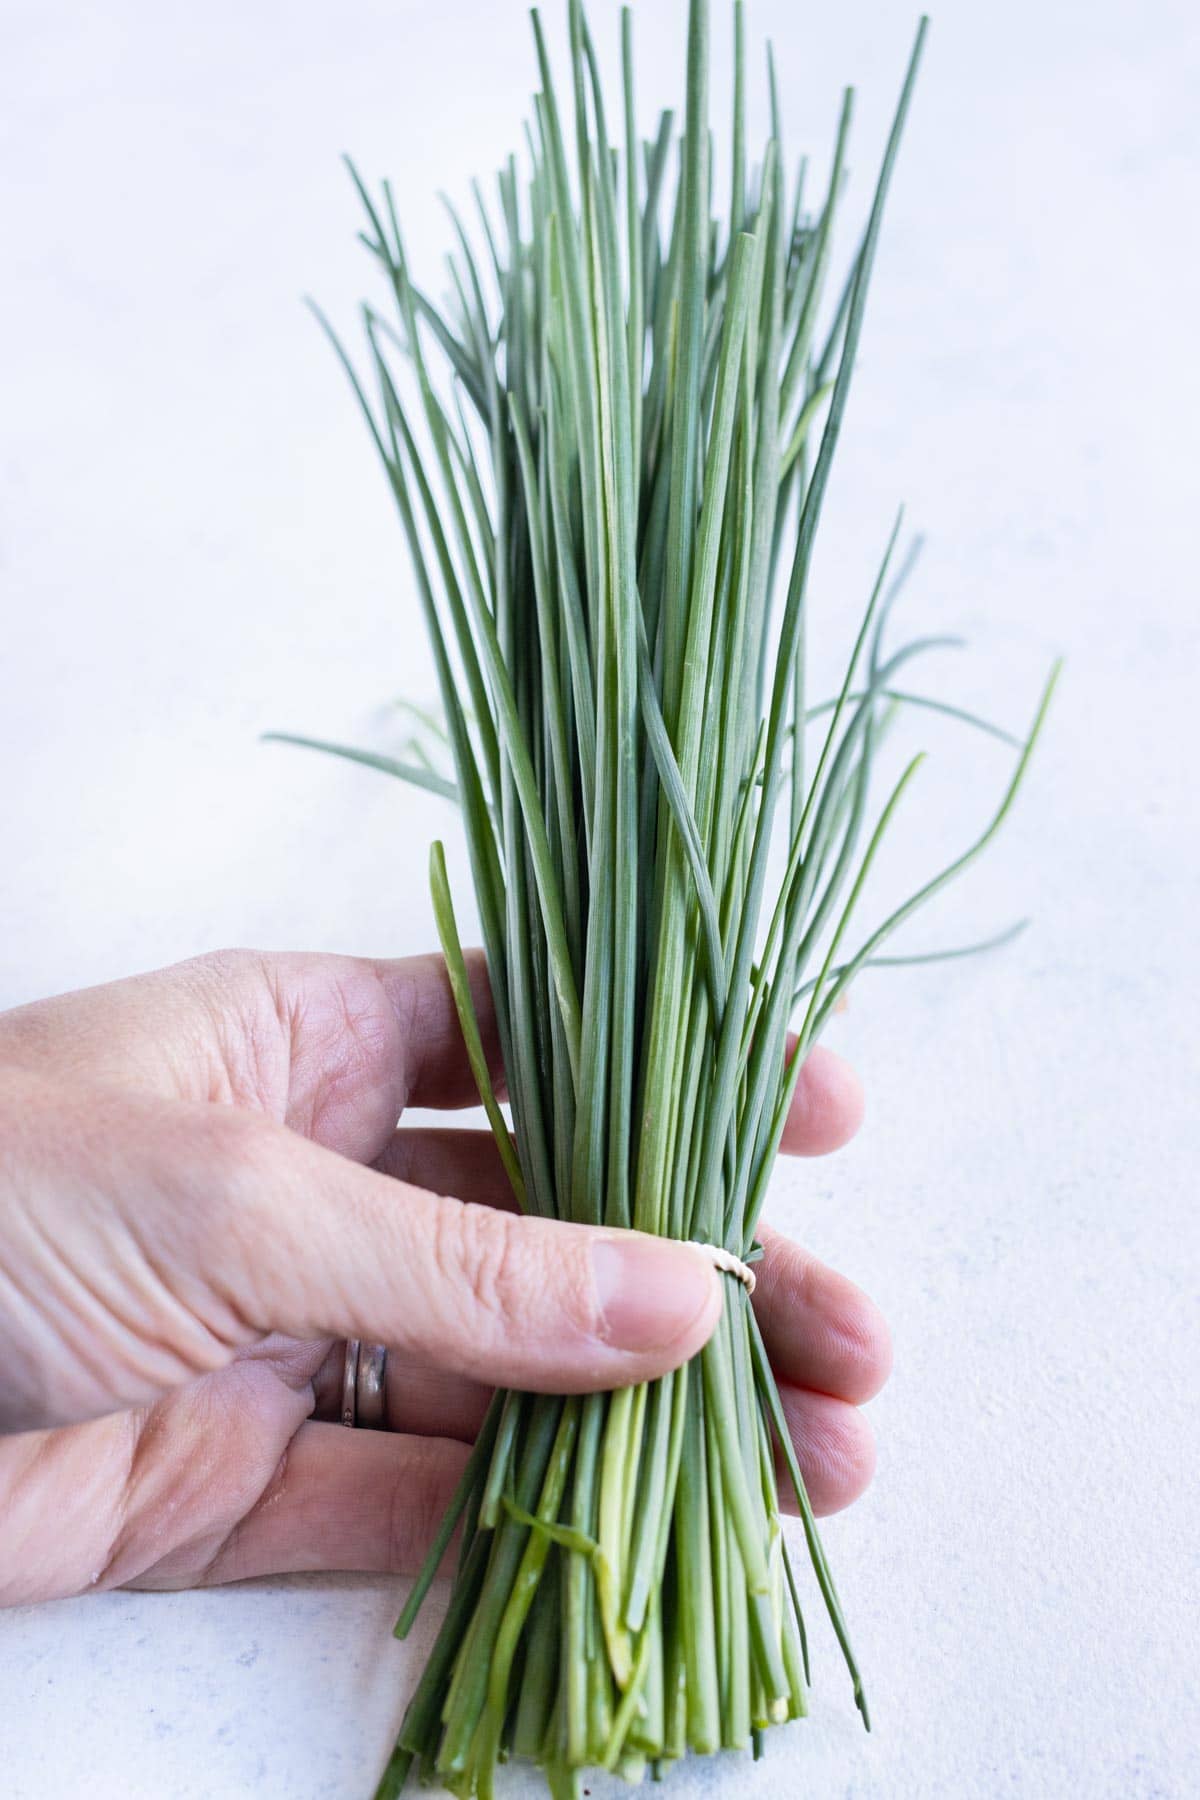 A hand is shown holding a bunch of chives.